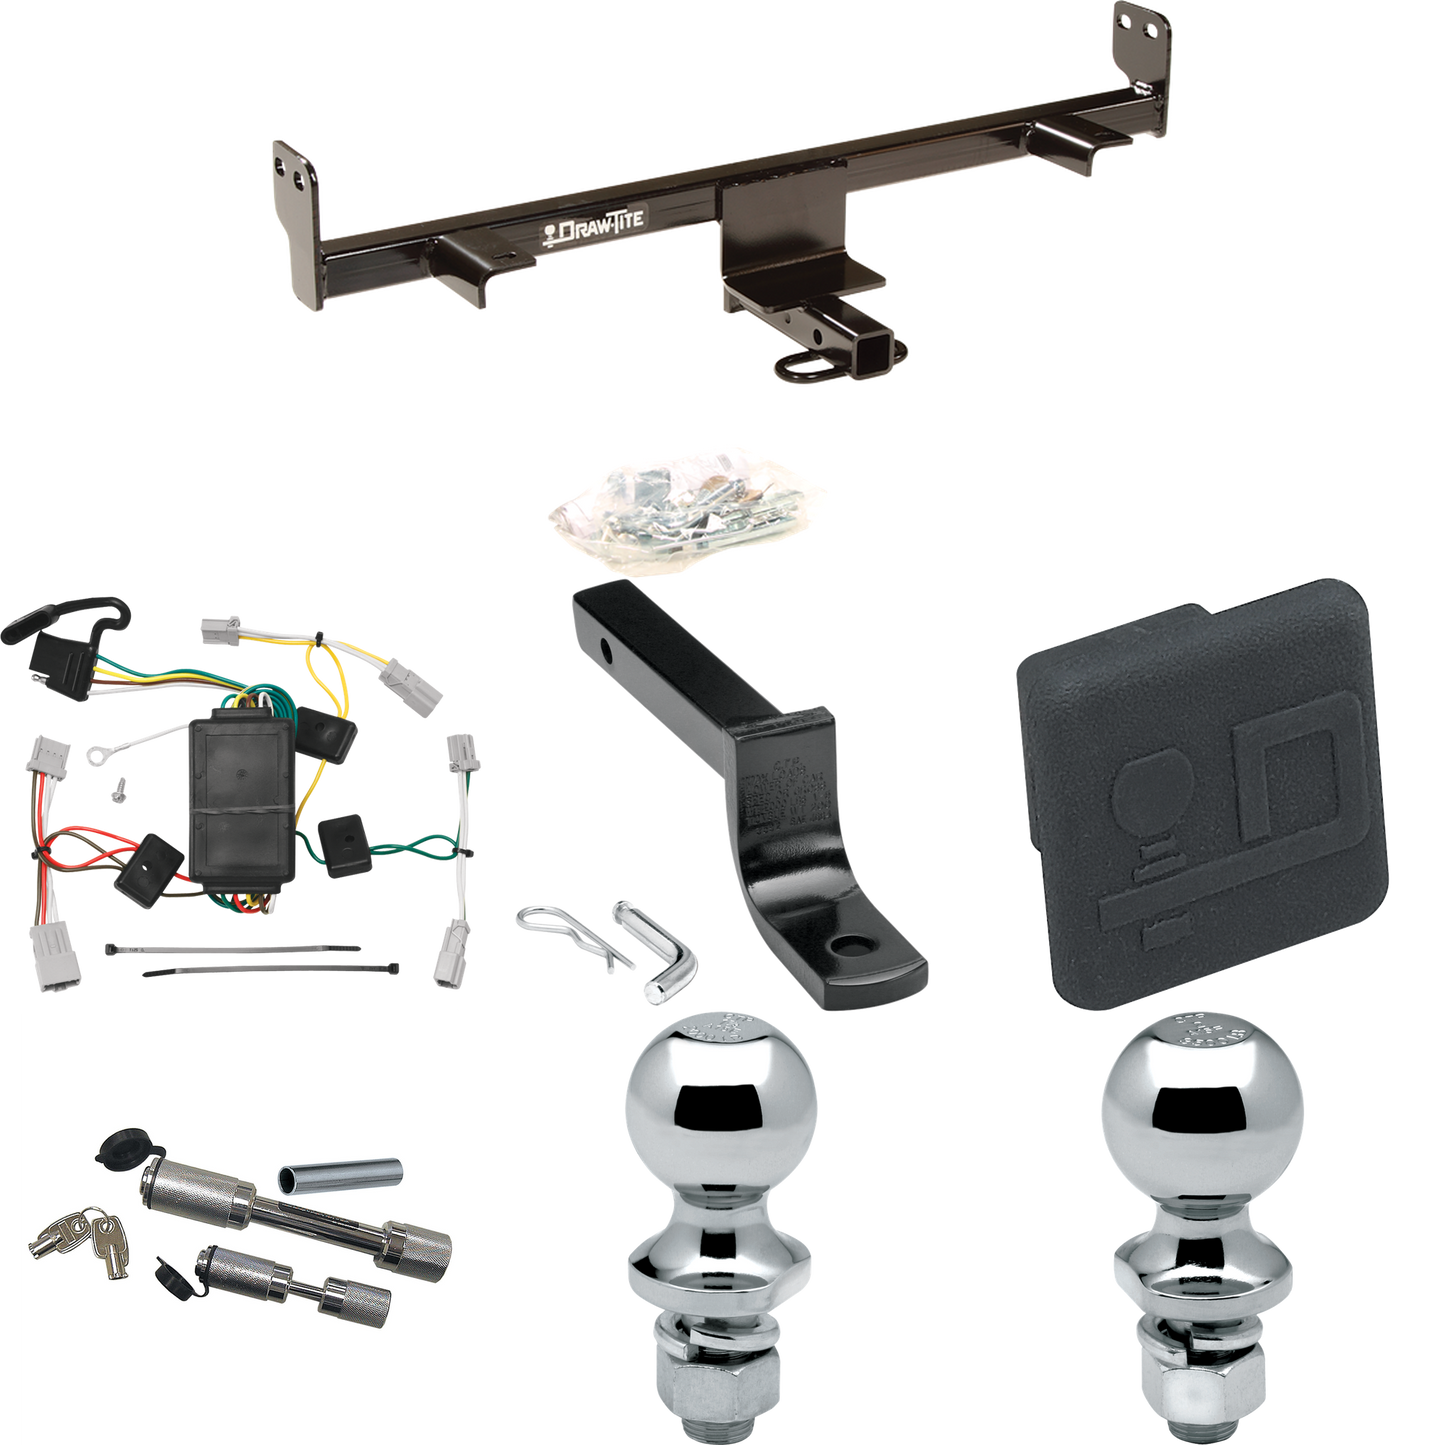 Fits 2004-2009 Mazda 3 Trailer Hitch Tow PKG w/ 4-Flat Wiring Harness + Draw-Bar + 1-7/8" + 2" Ball + Hitch Cover + Dual Hitch & Coupler Locks (For Hatchback, Except w/Grand Touring LED Taillights Models) By Draw-Tite